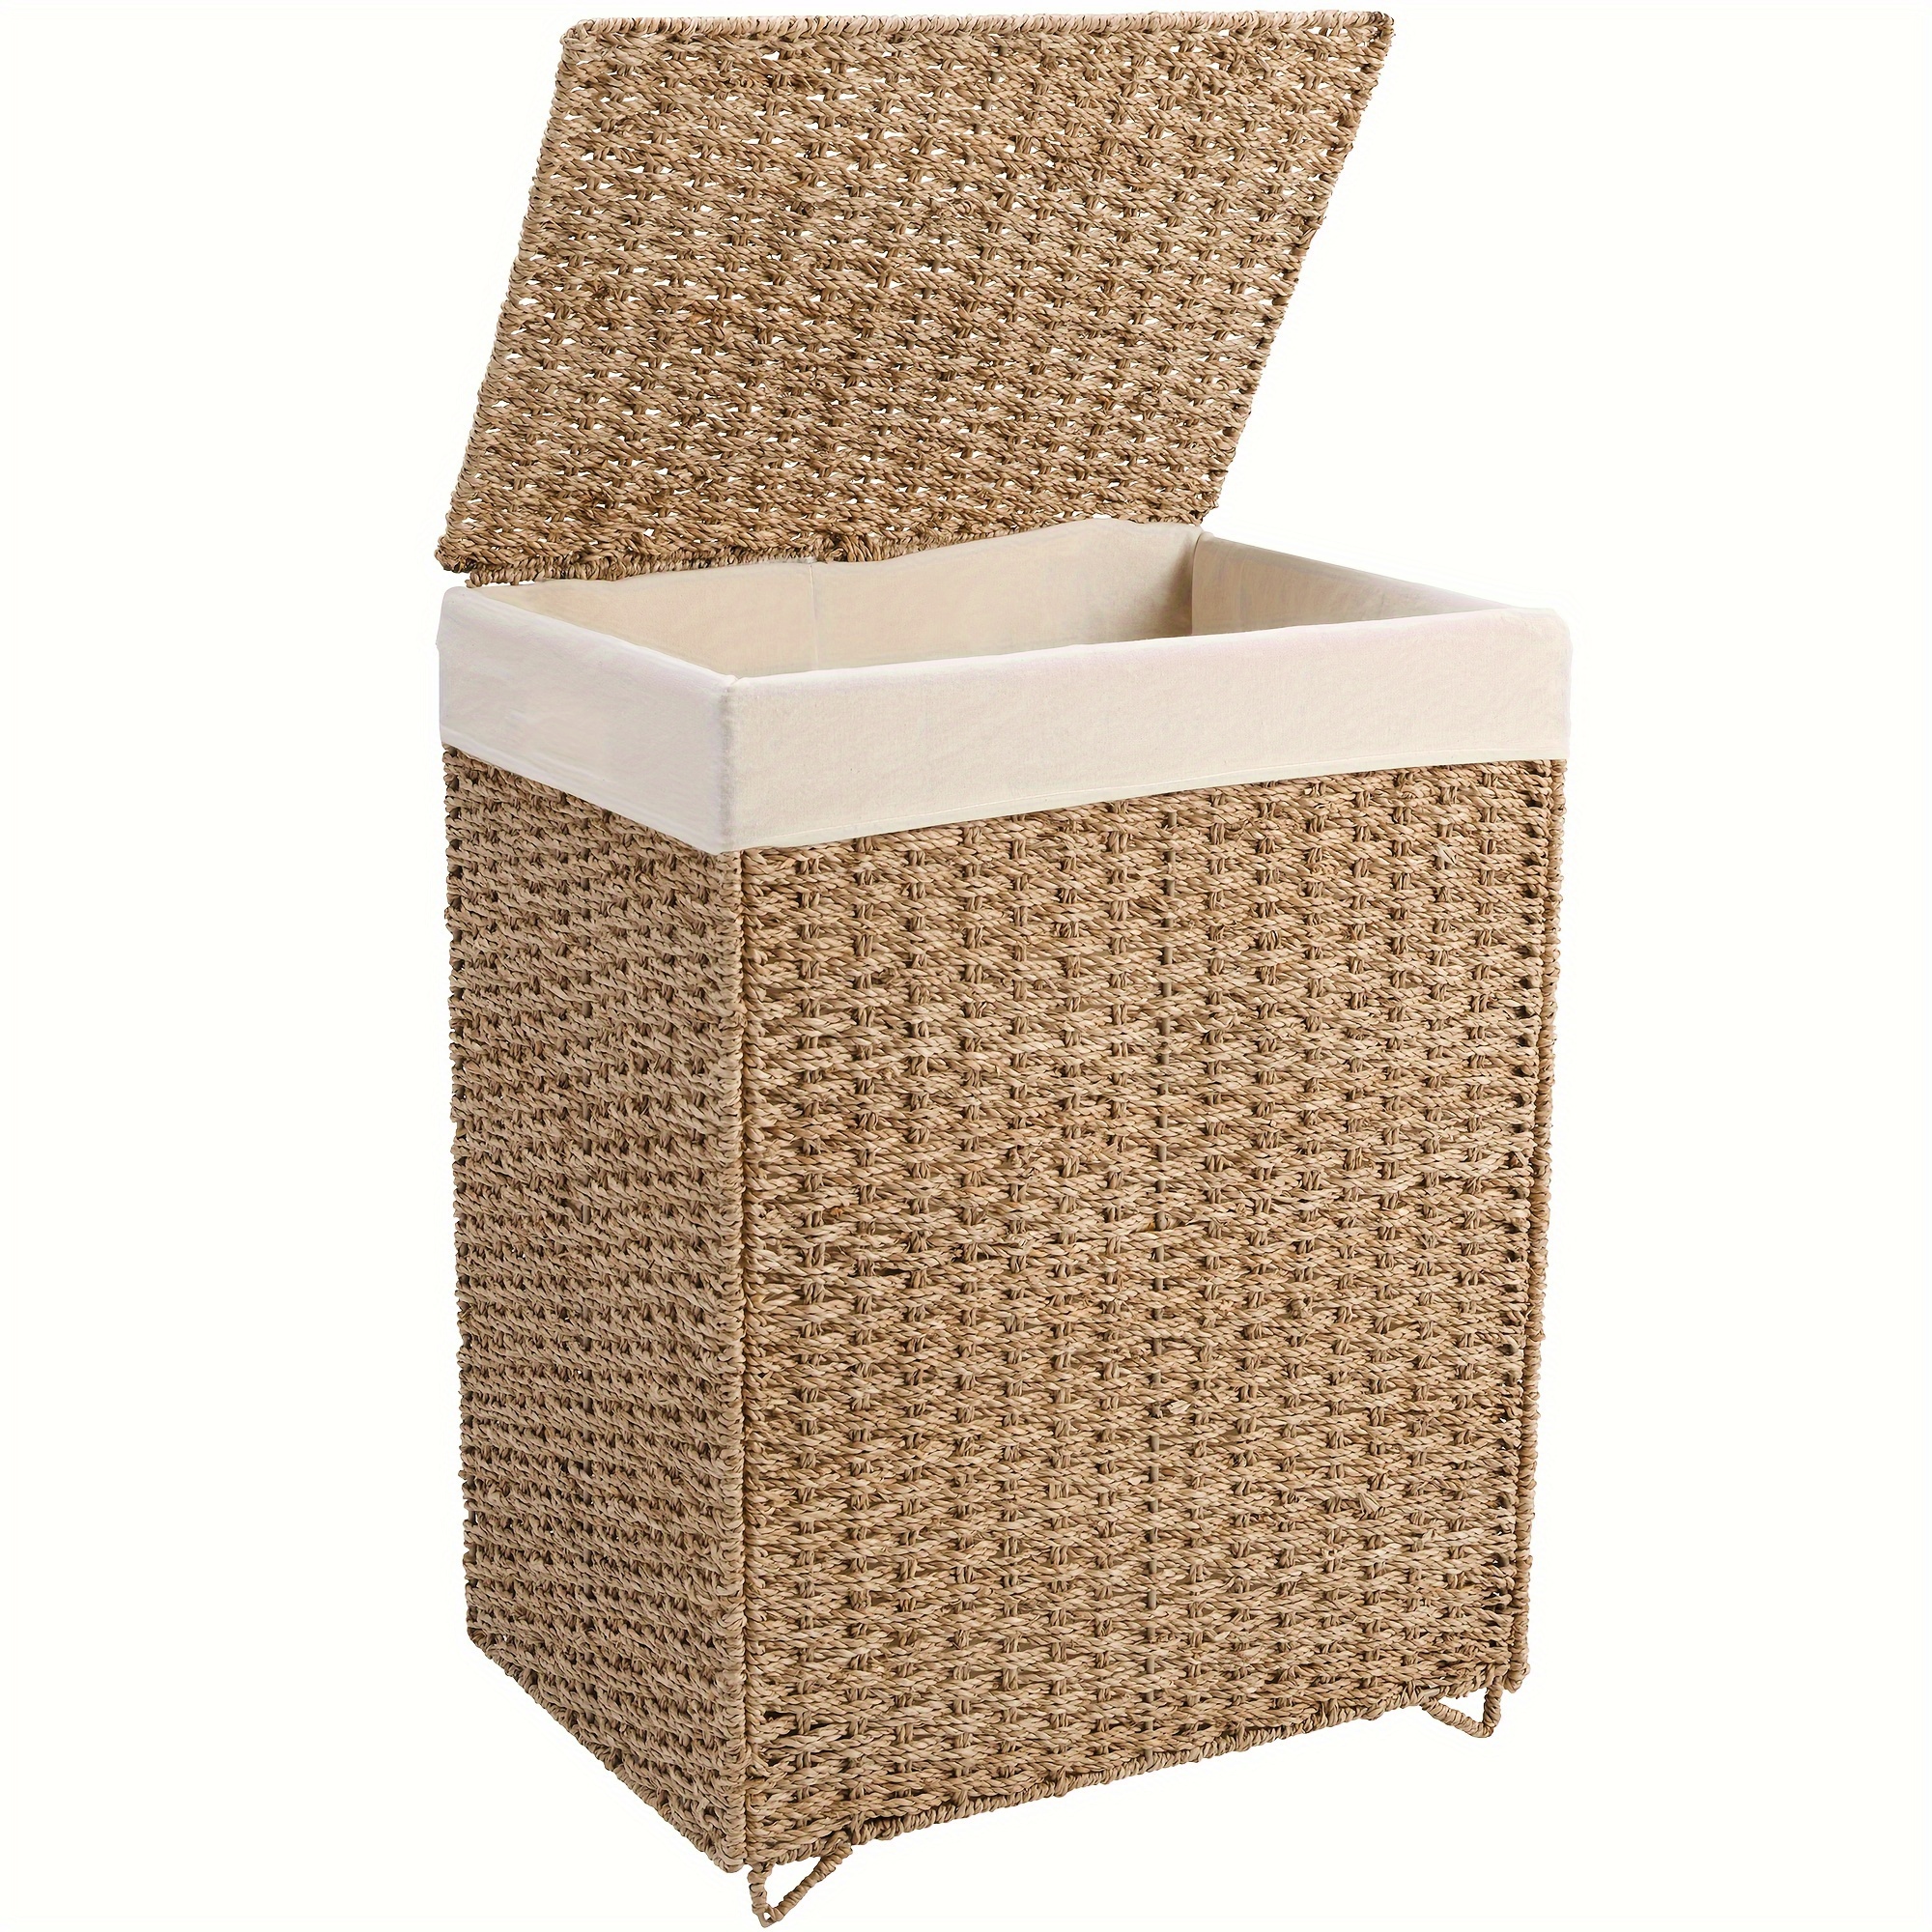 

90l Laundry Hamper With Lid - 23.8 Gal Natural Seagrass Hand Woven Laundry Basket Organizer With Removable Liner, Foldable Rattan Clothes Hamper Toys Storage Bin For Bathroom, Bedroom